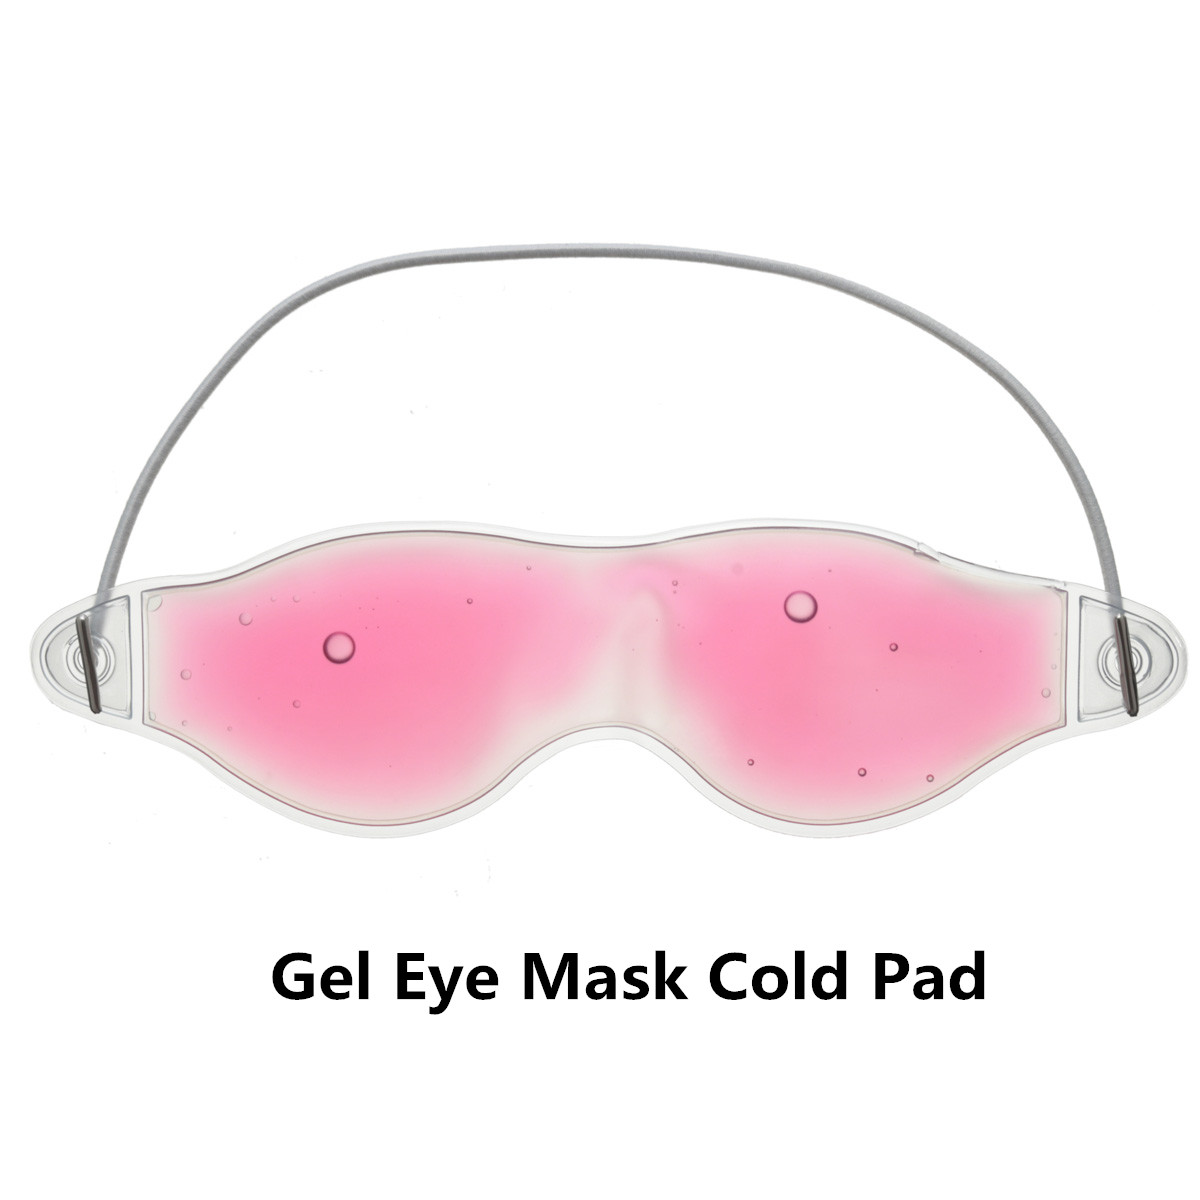 Gel Eye Mask Cold Pack Warm Hot Heat Ice Cool Soothing Tired Eyes